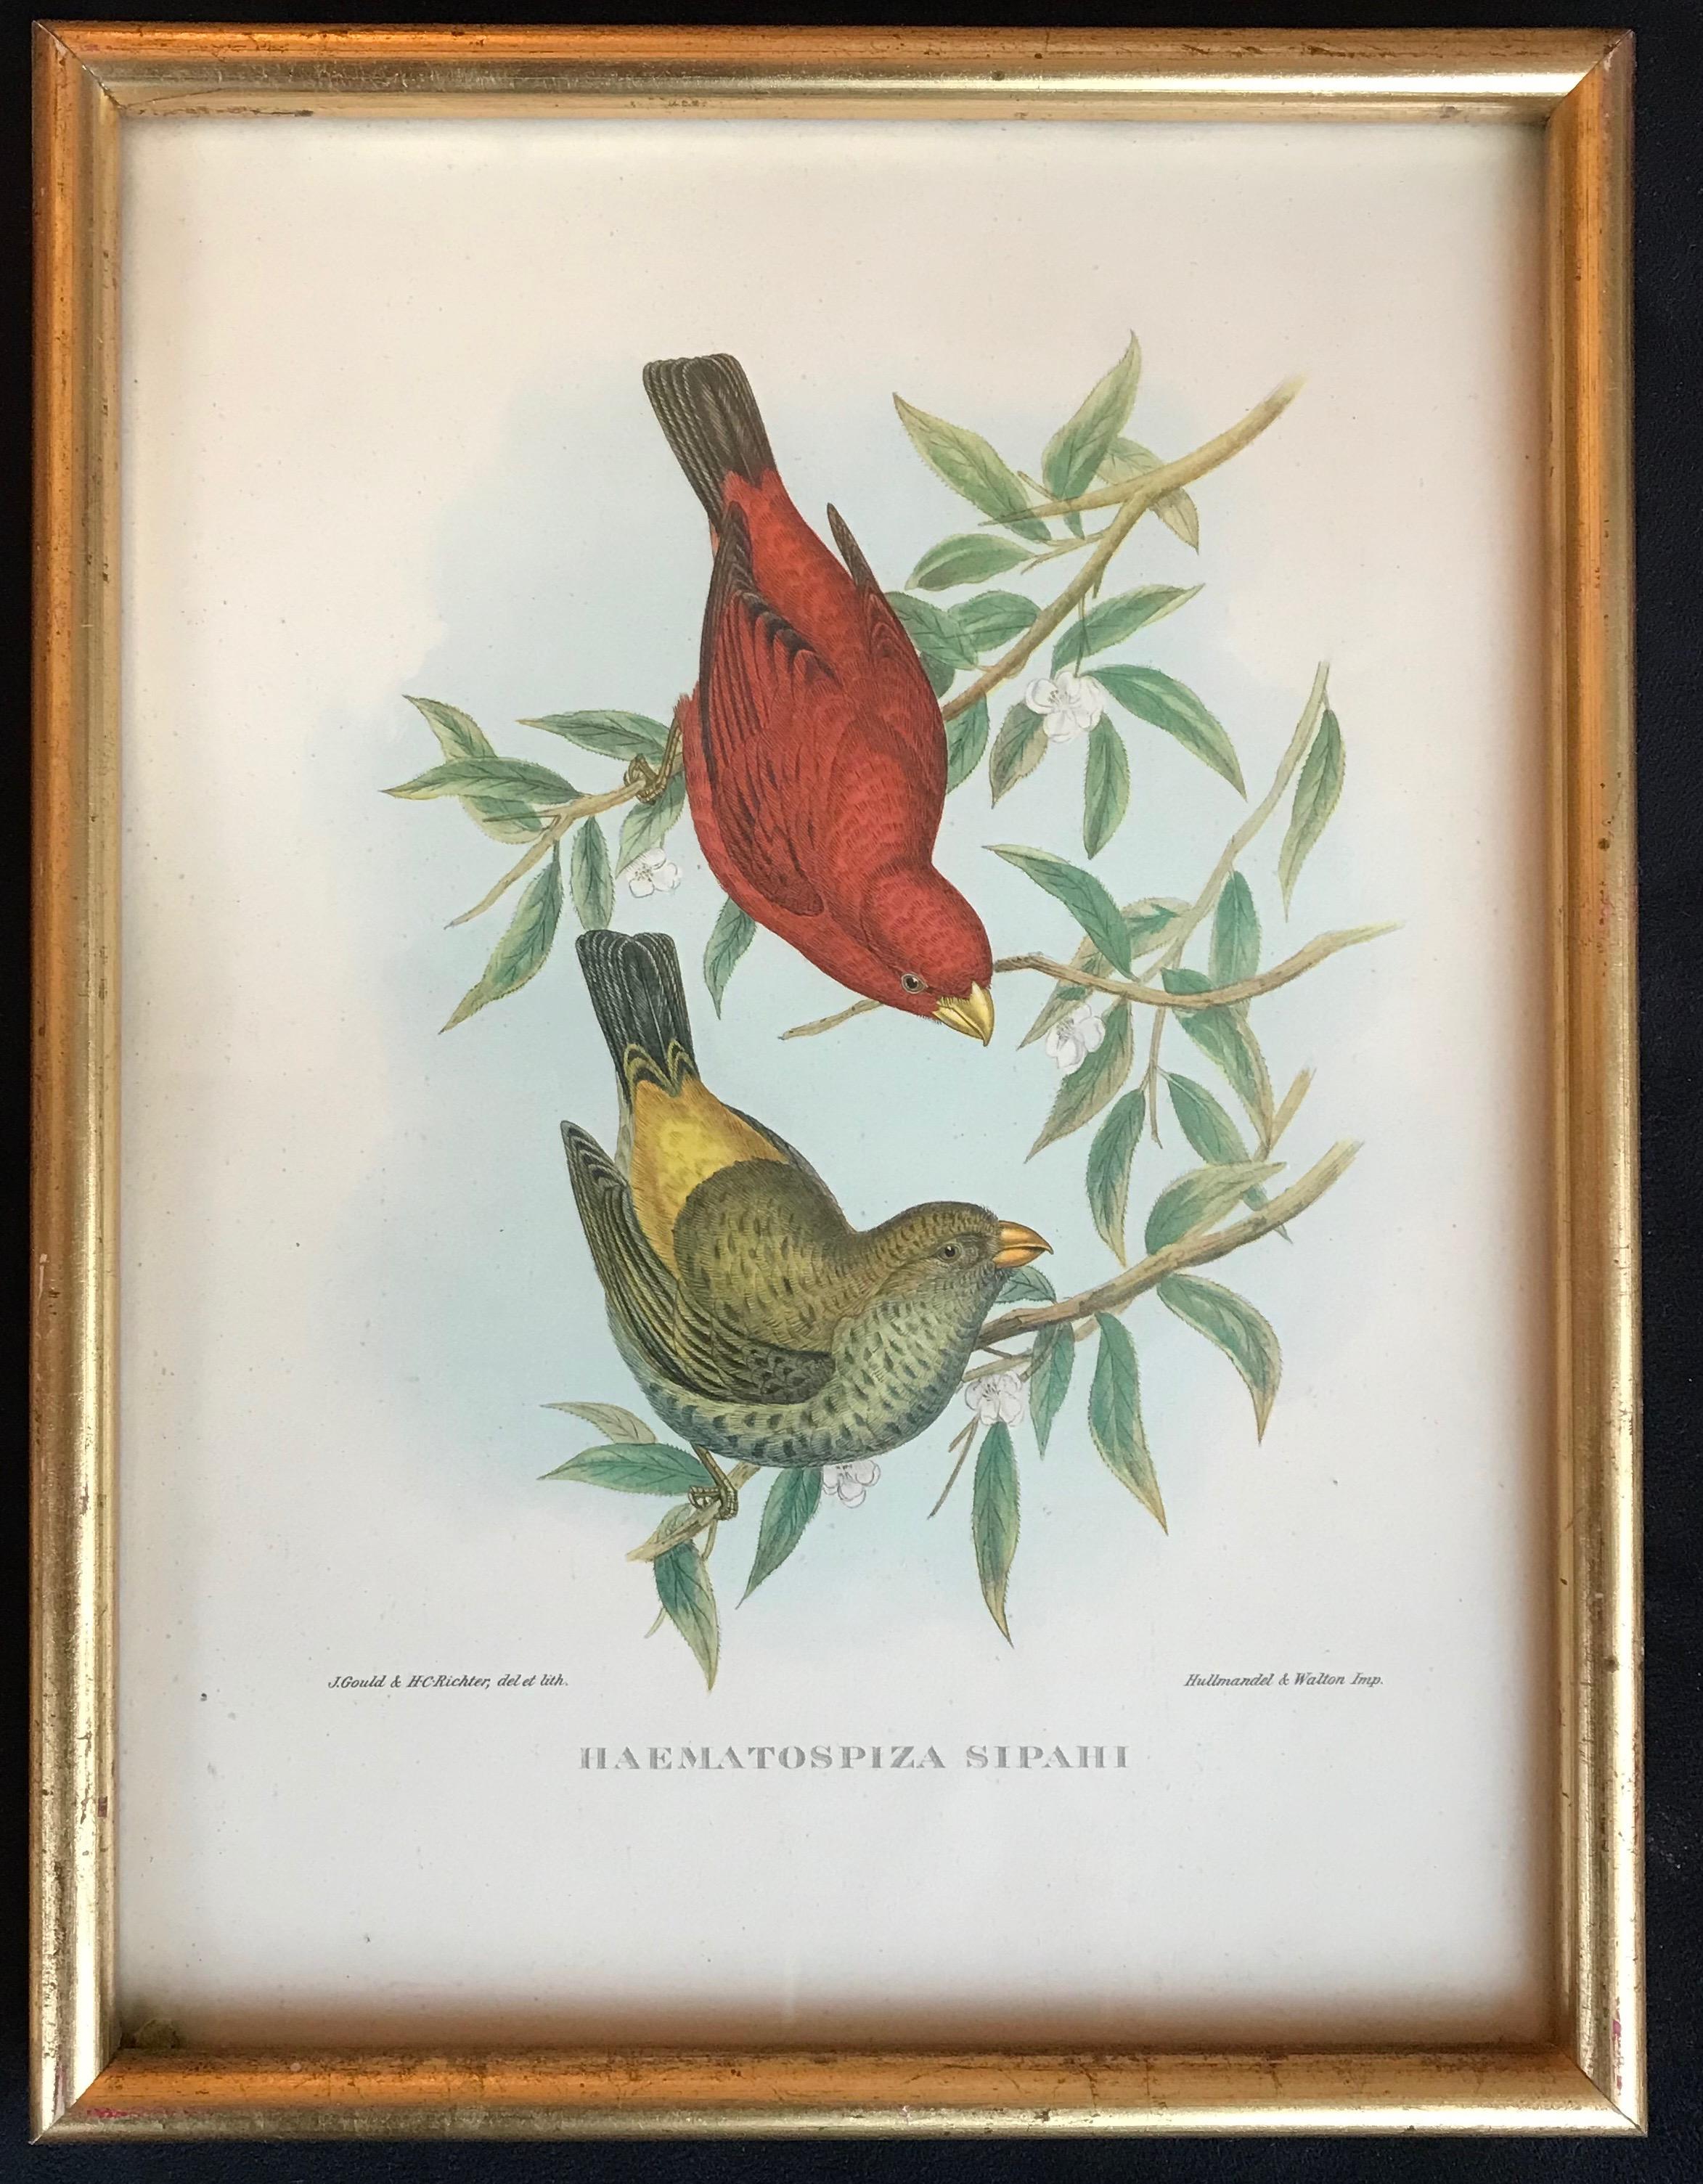 Birds of Europe by John and Elisabeth Goult, 1832 - Naturalistic Art by John Gould and Elizabeth Gould